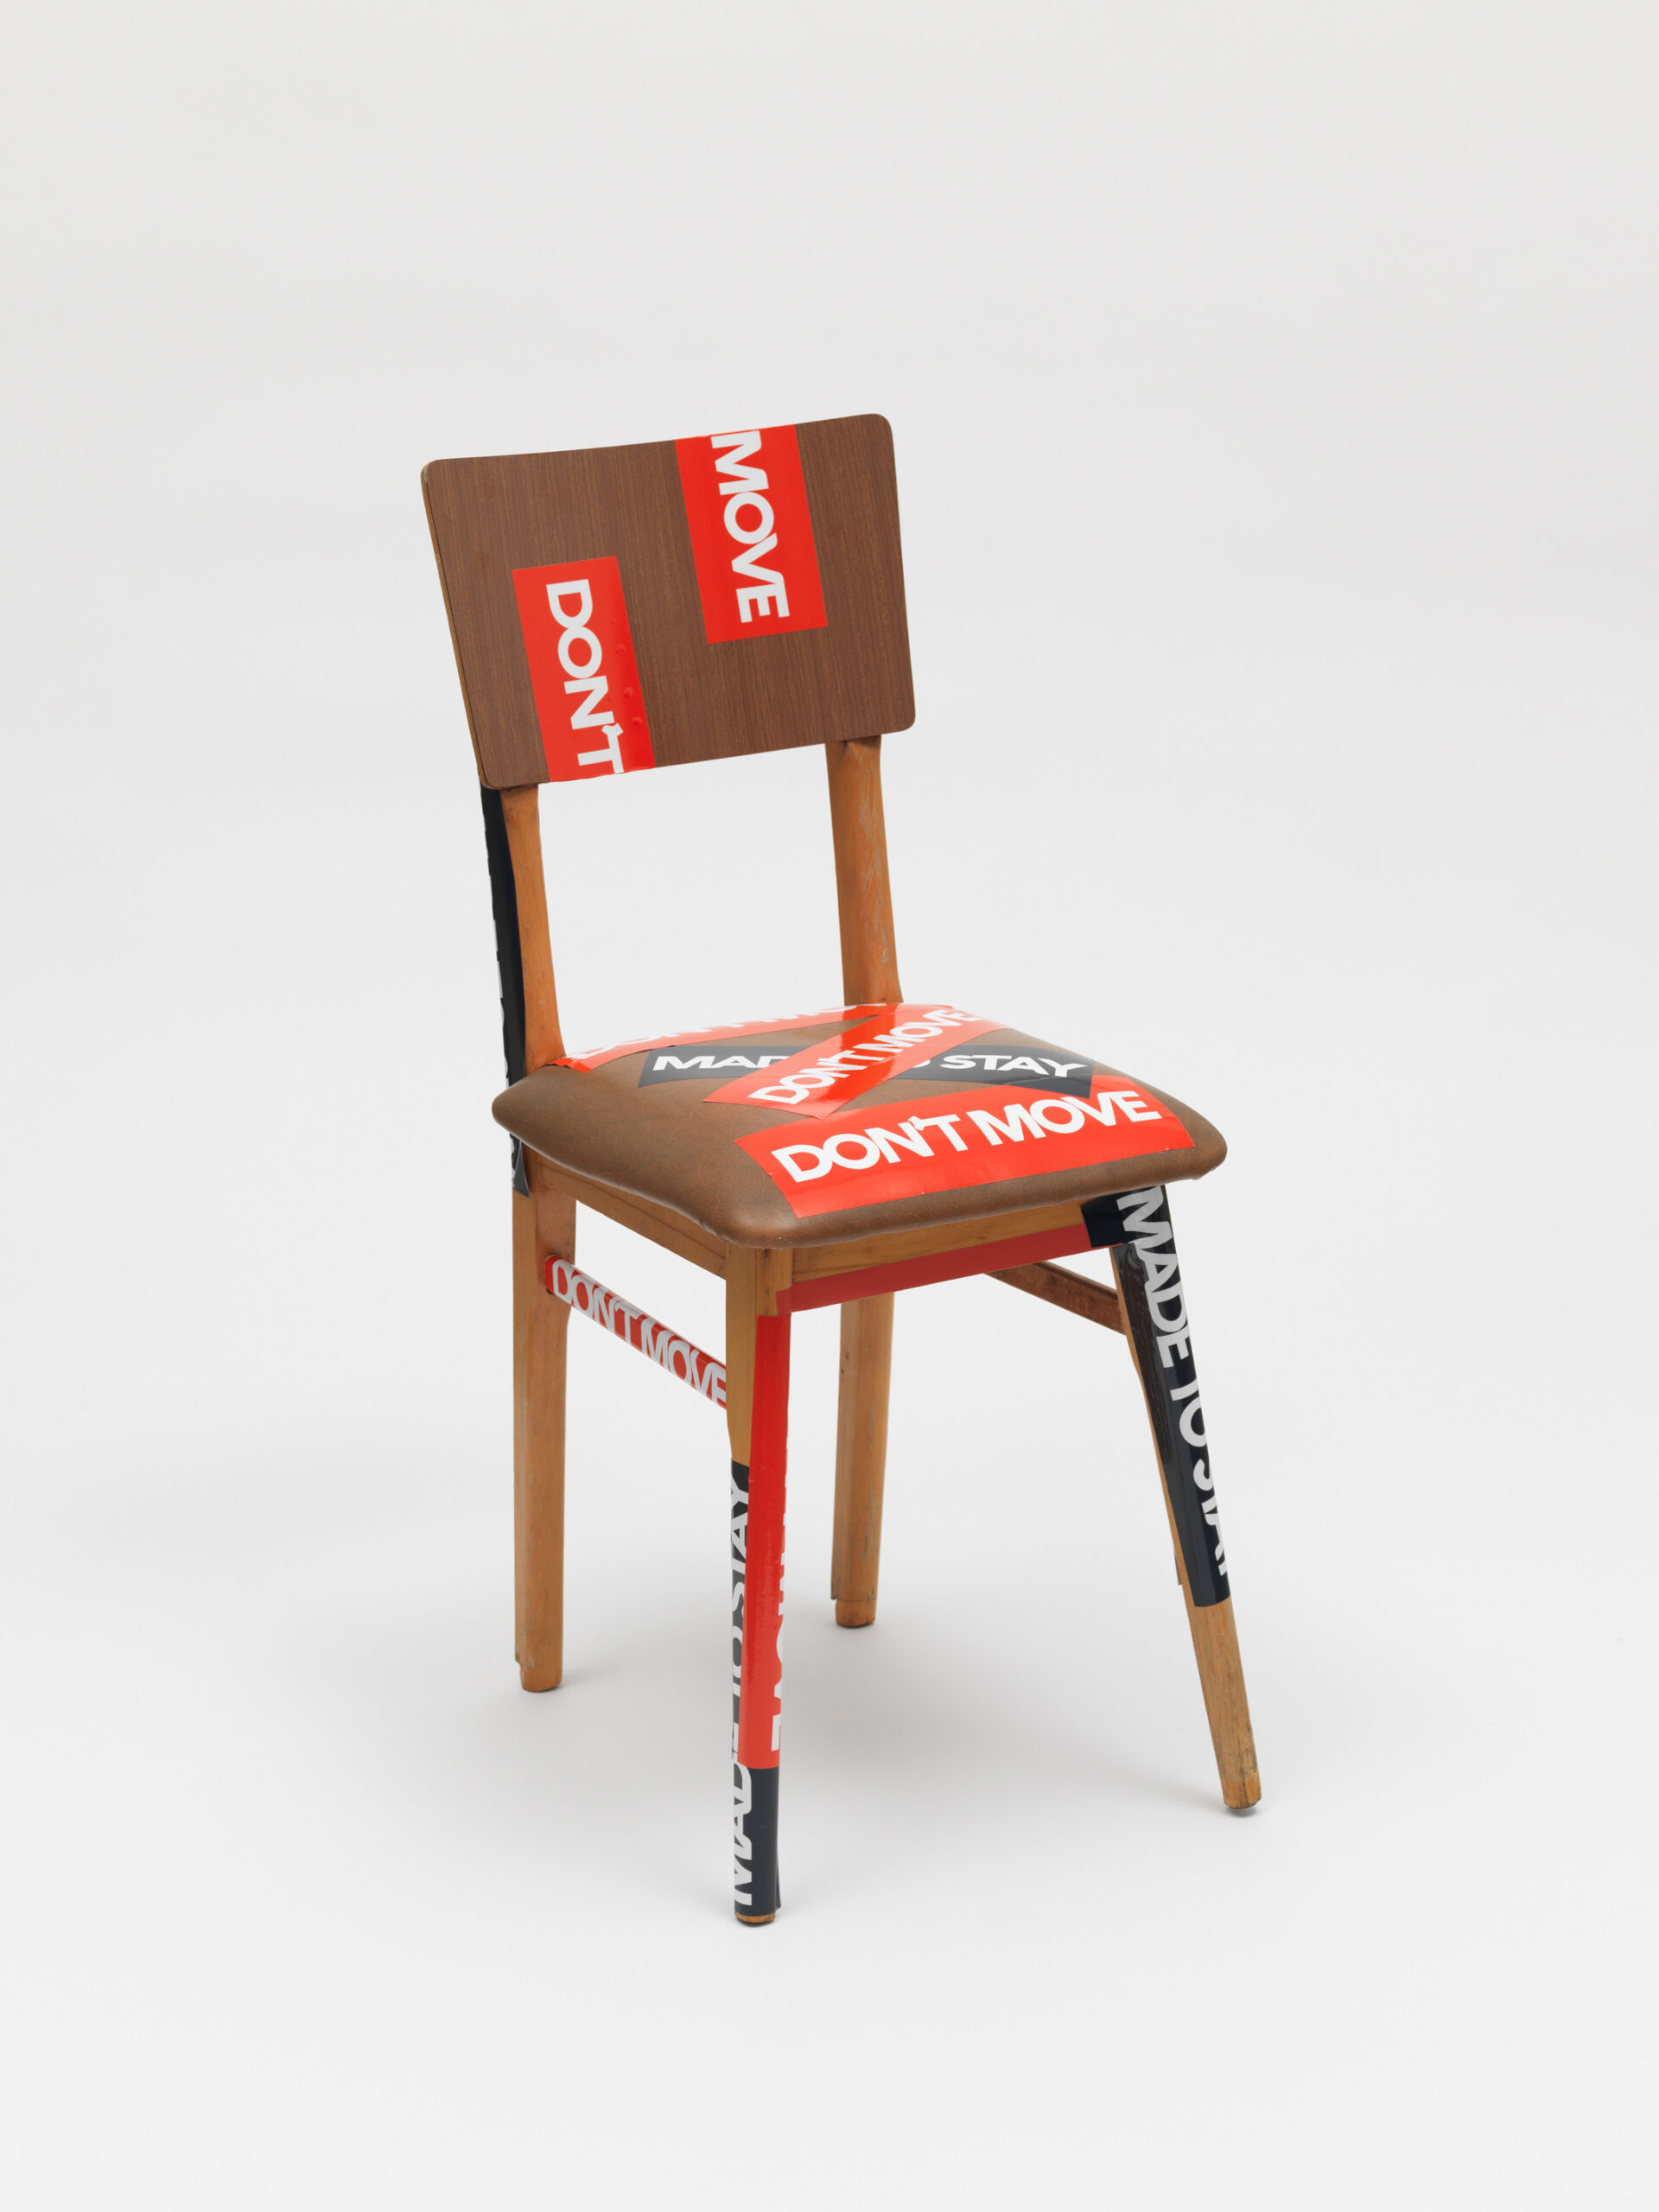 Product image: Vintage Dining Chair, modified by Vasso & Evi, claim stickers, 2022 Athens, 4.6 tons